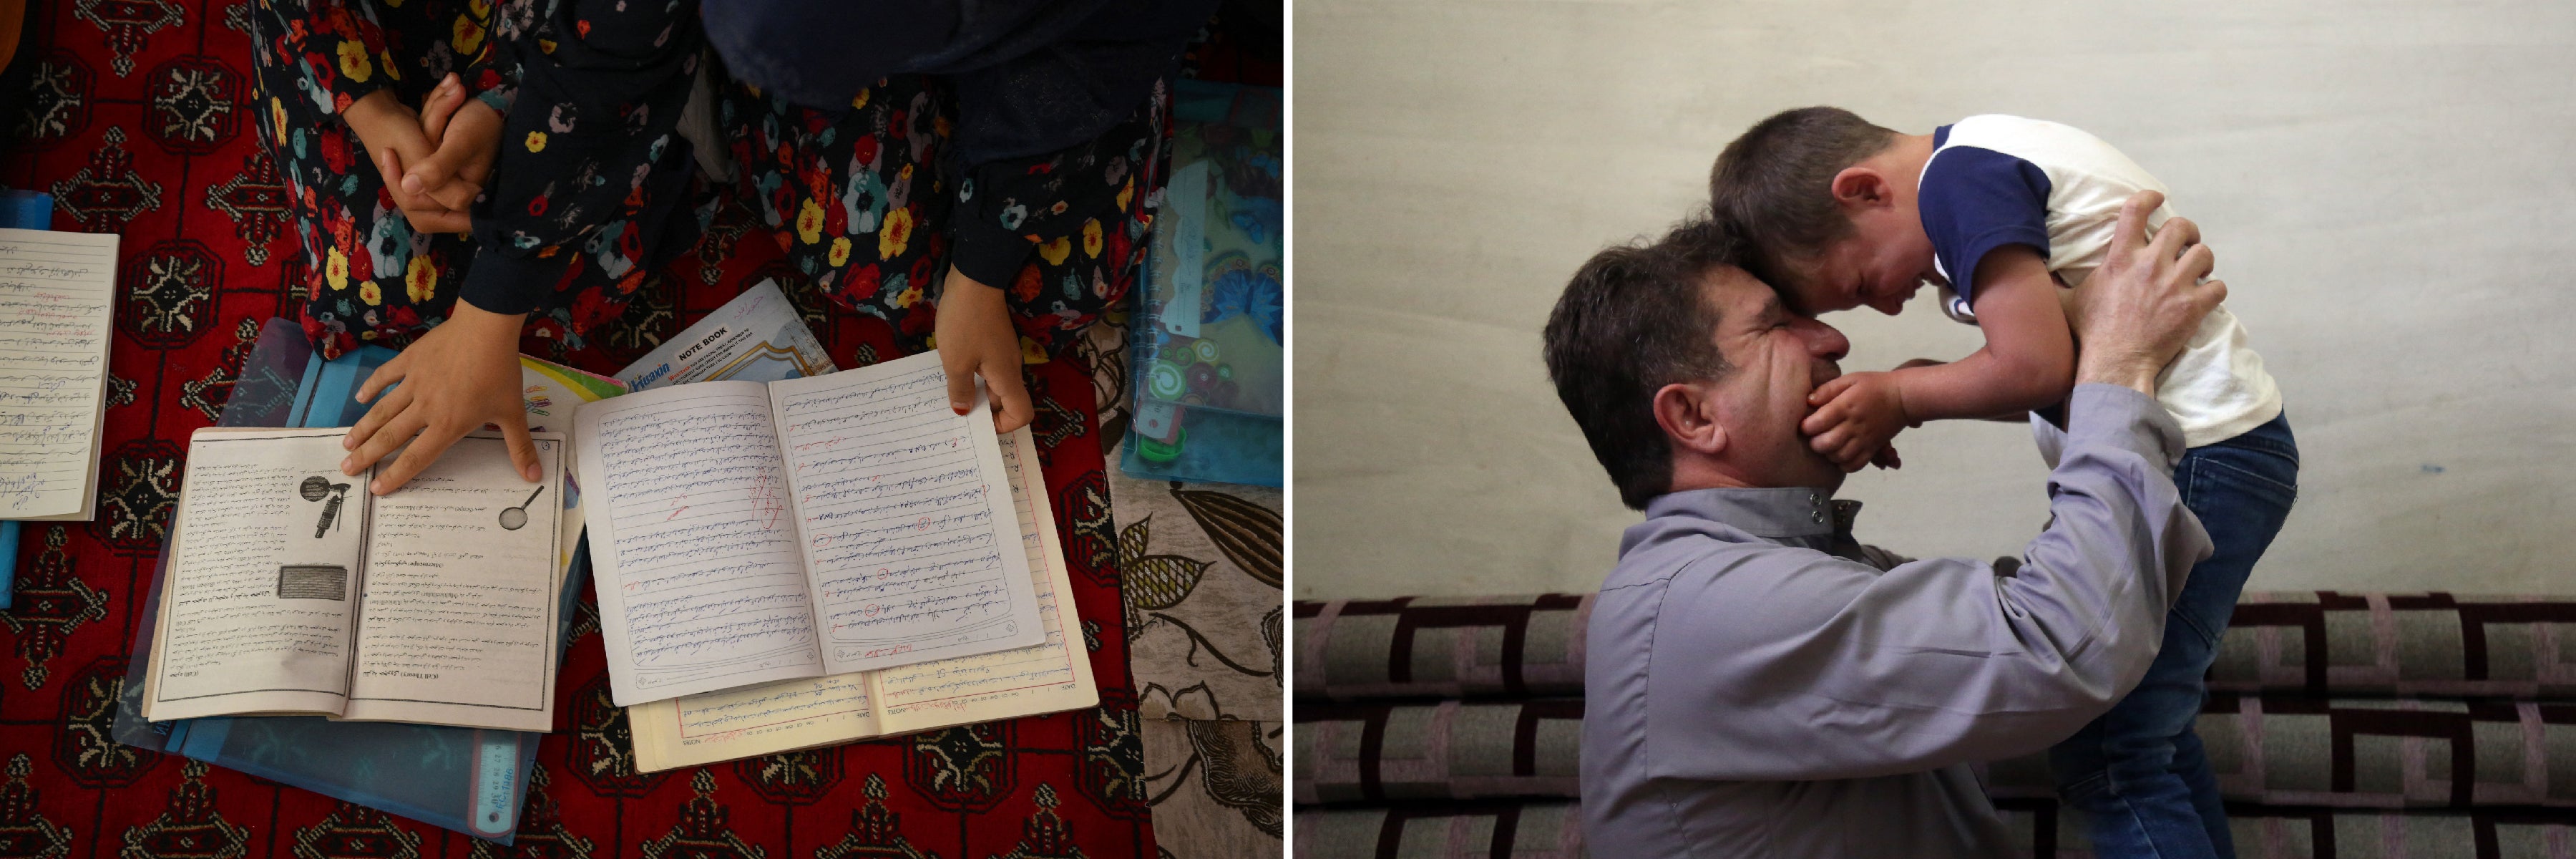 LEFT: Girls study in a secret school at an undisclosed location in Afghanistan, July 25, 2022. © 2022 Daniel Leal/AFP RIGHT: Ibrahim, a 5-year-old boy with autism, is held by his father in Idlib, Syria, June 2022. Children with disabilities caught up in the Syrian war are at greater risk of harm and lack access to basic health care, education, humanitarian aid, assistive devices, and psychosocial support. © 2022 Human Rights Watch